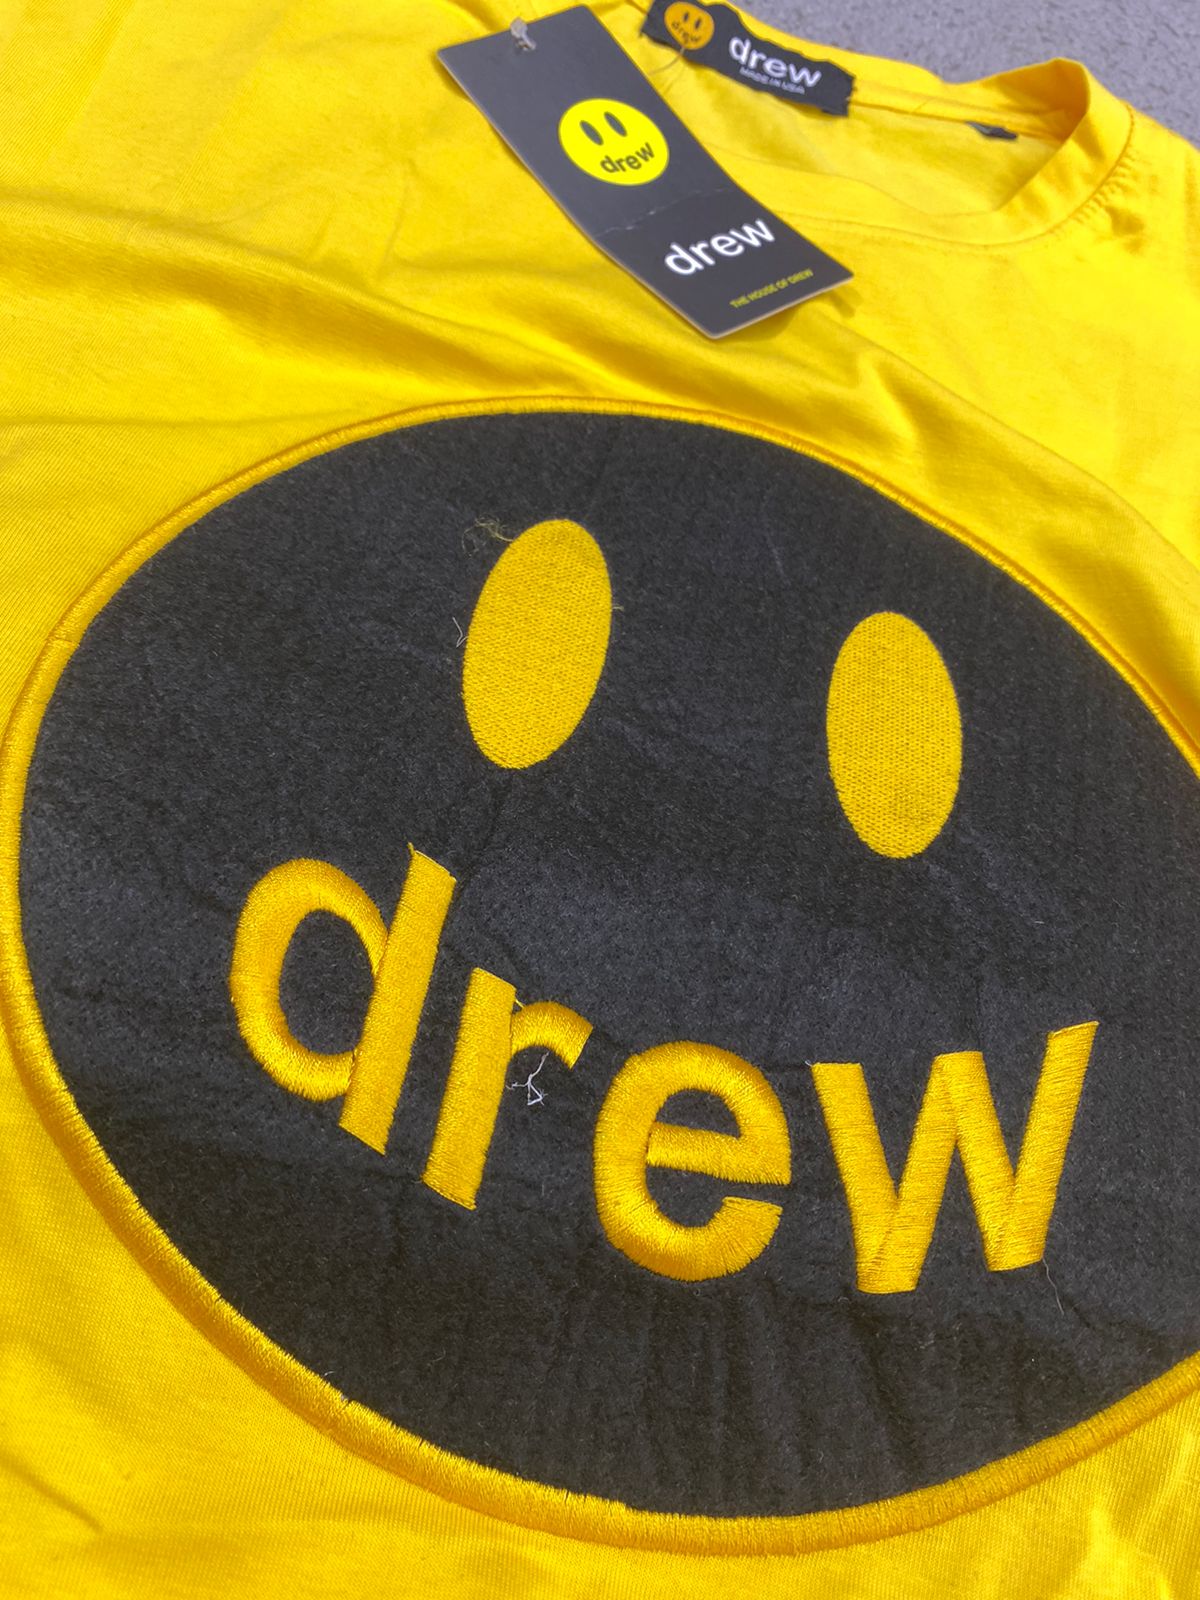 Drew Ewd Yellow Colour With Drew Embroidery Print Drop Shoulder TShirt 108531